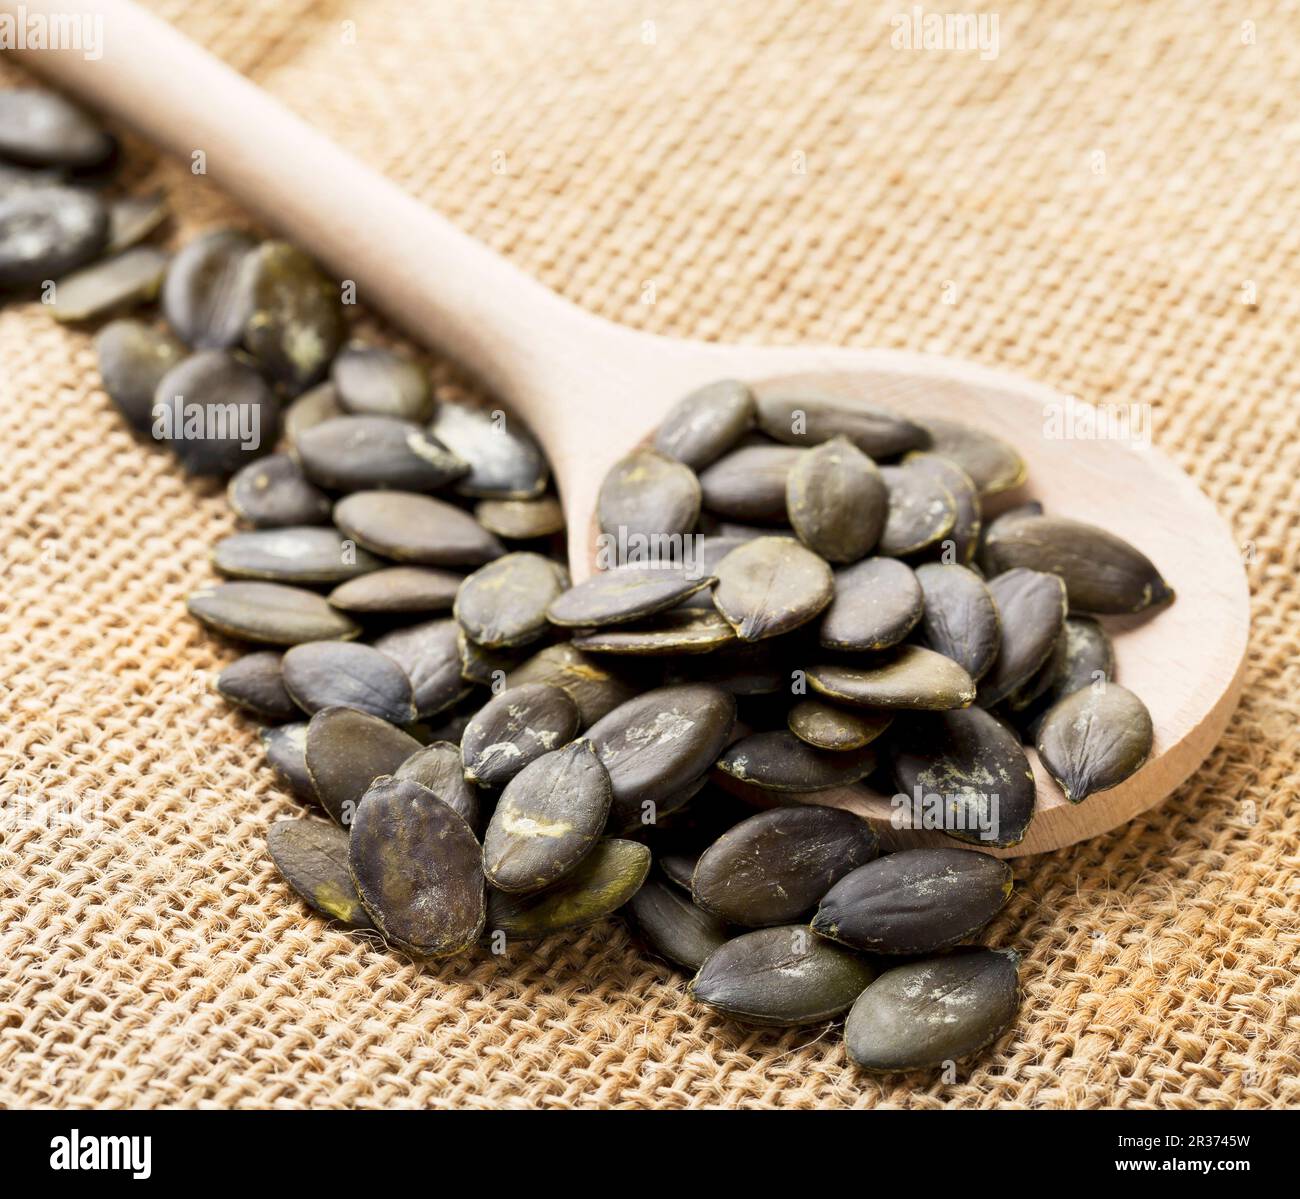 Unpeeled pumpkin seeds on a wooden spoon on a jute sack Stock Photo